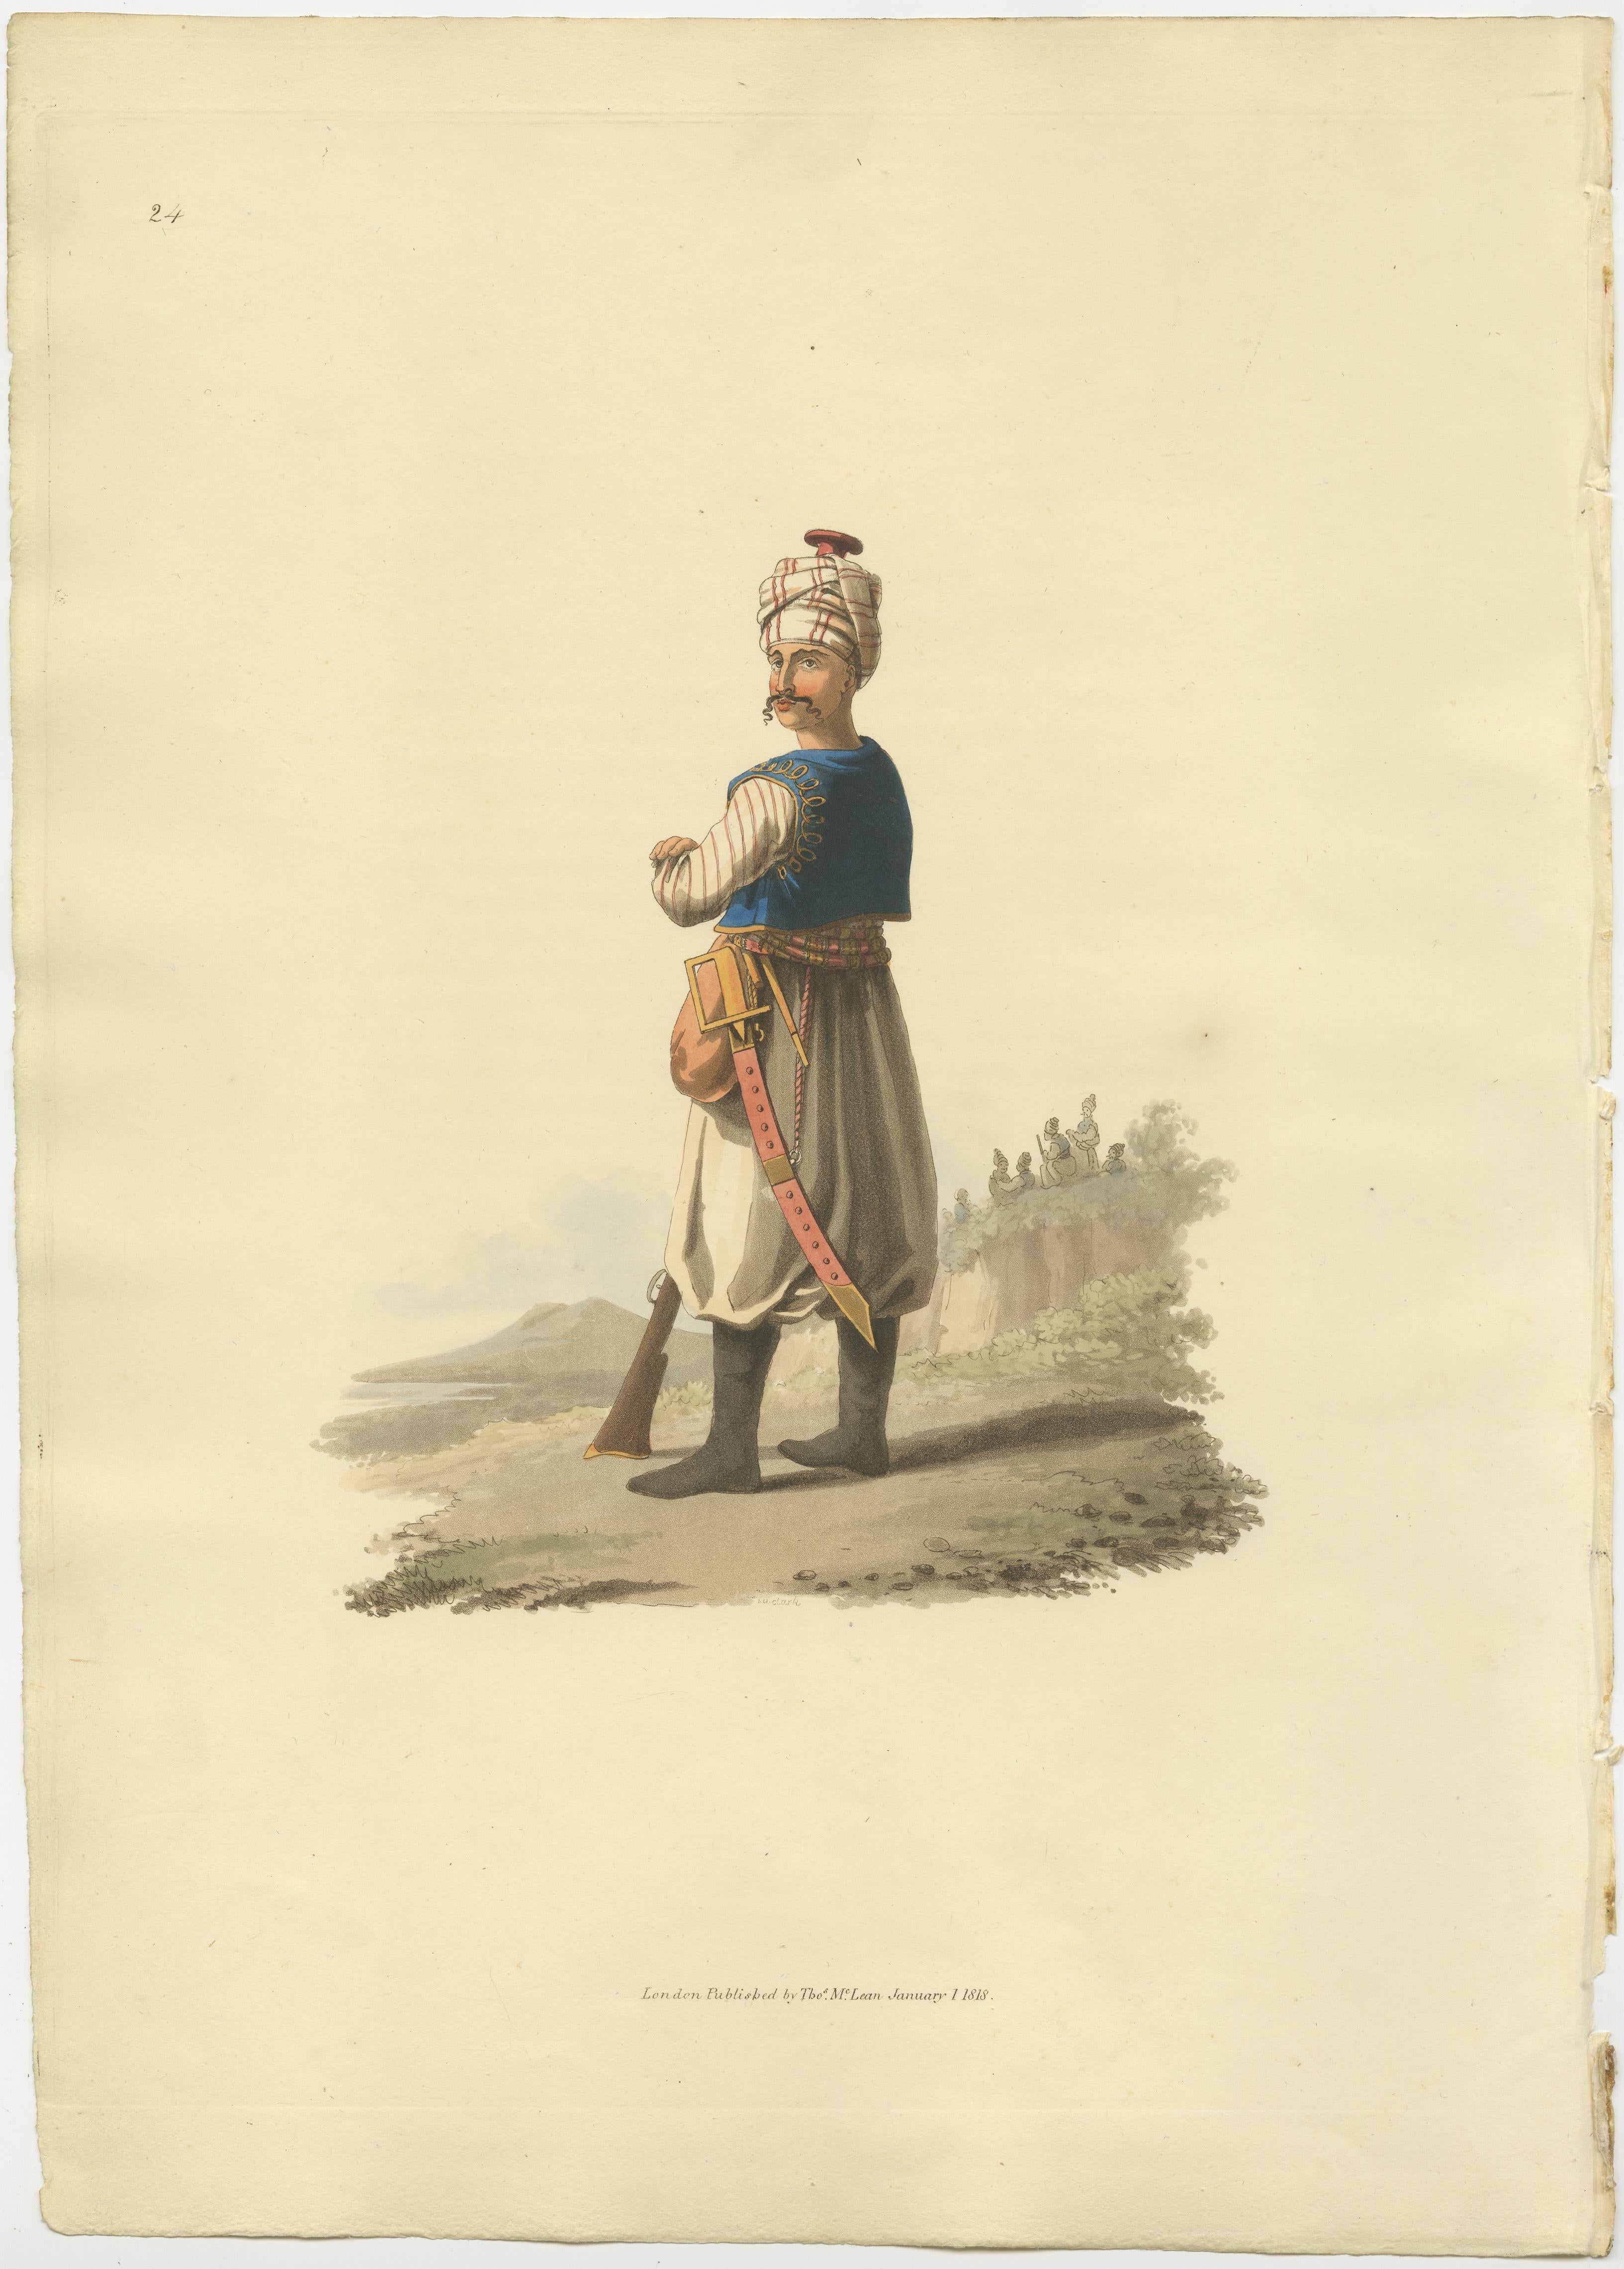 This print is from 'The Military Costume of Turkey. Illustrated by A Series of Engravings. From Drawings made on the Spot. Dedicated by Permission to His Excellency the Minister of the Ottoman Porte to his Britannic Majesty.'

London, Published by